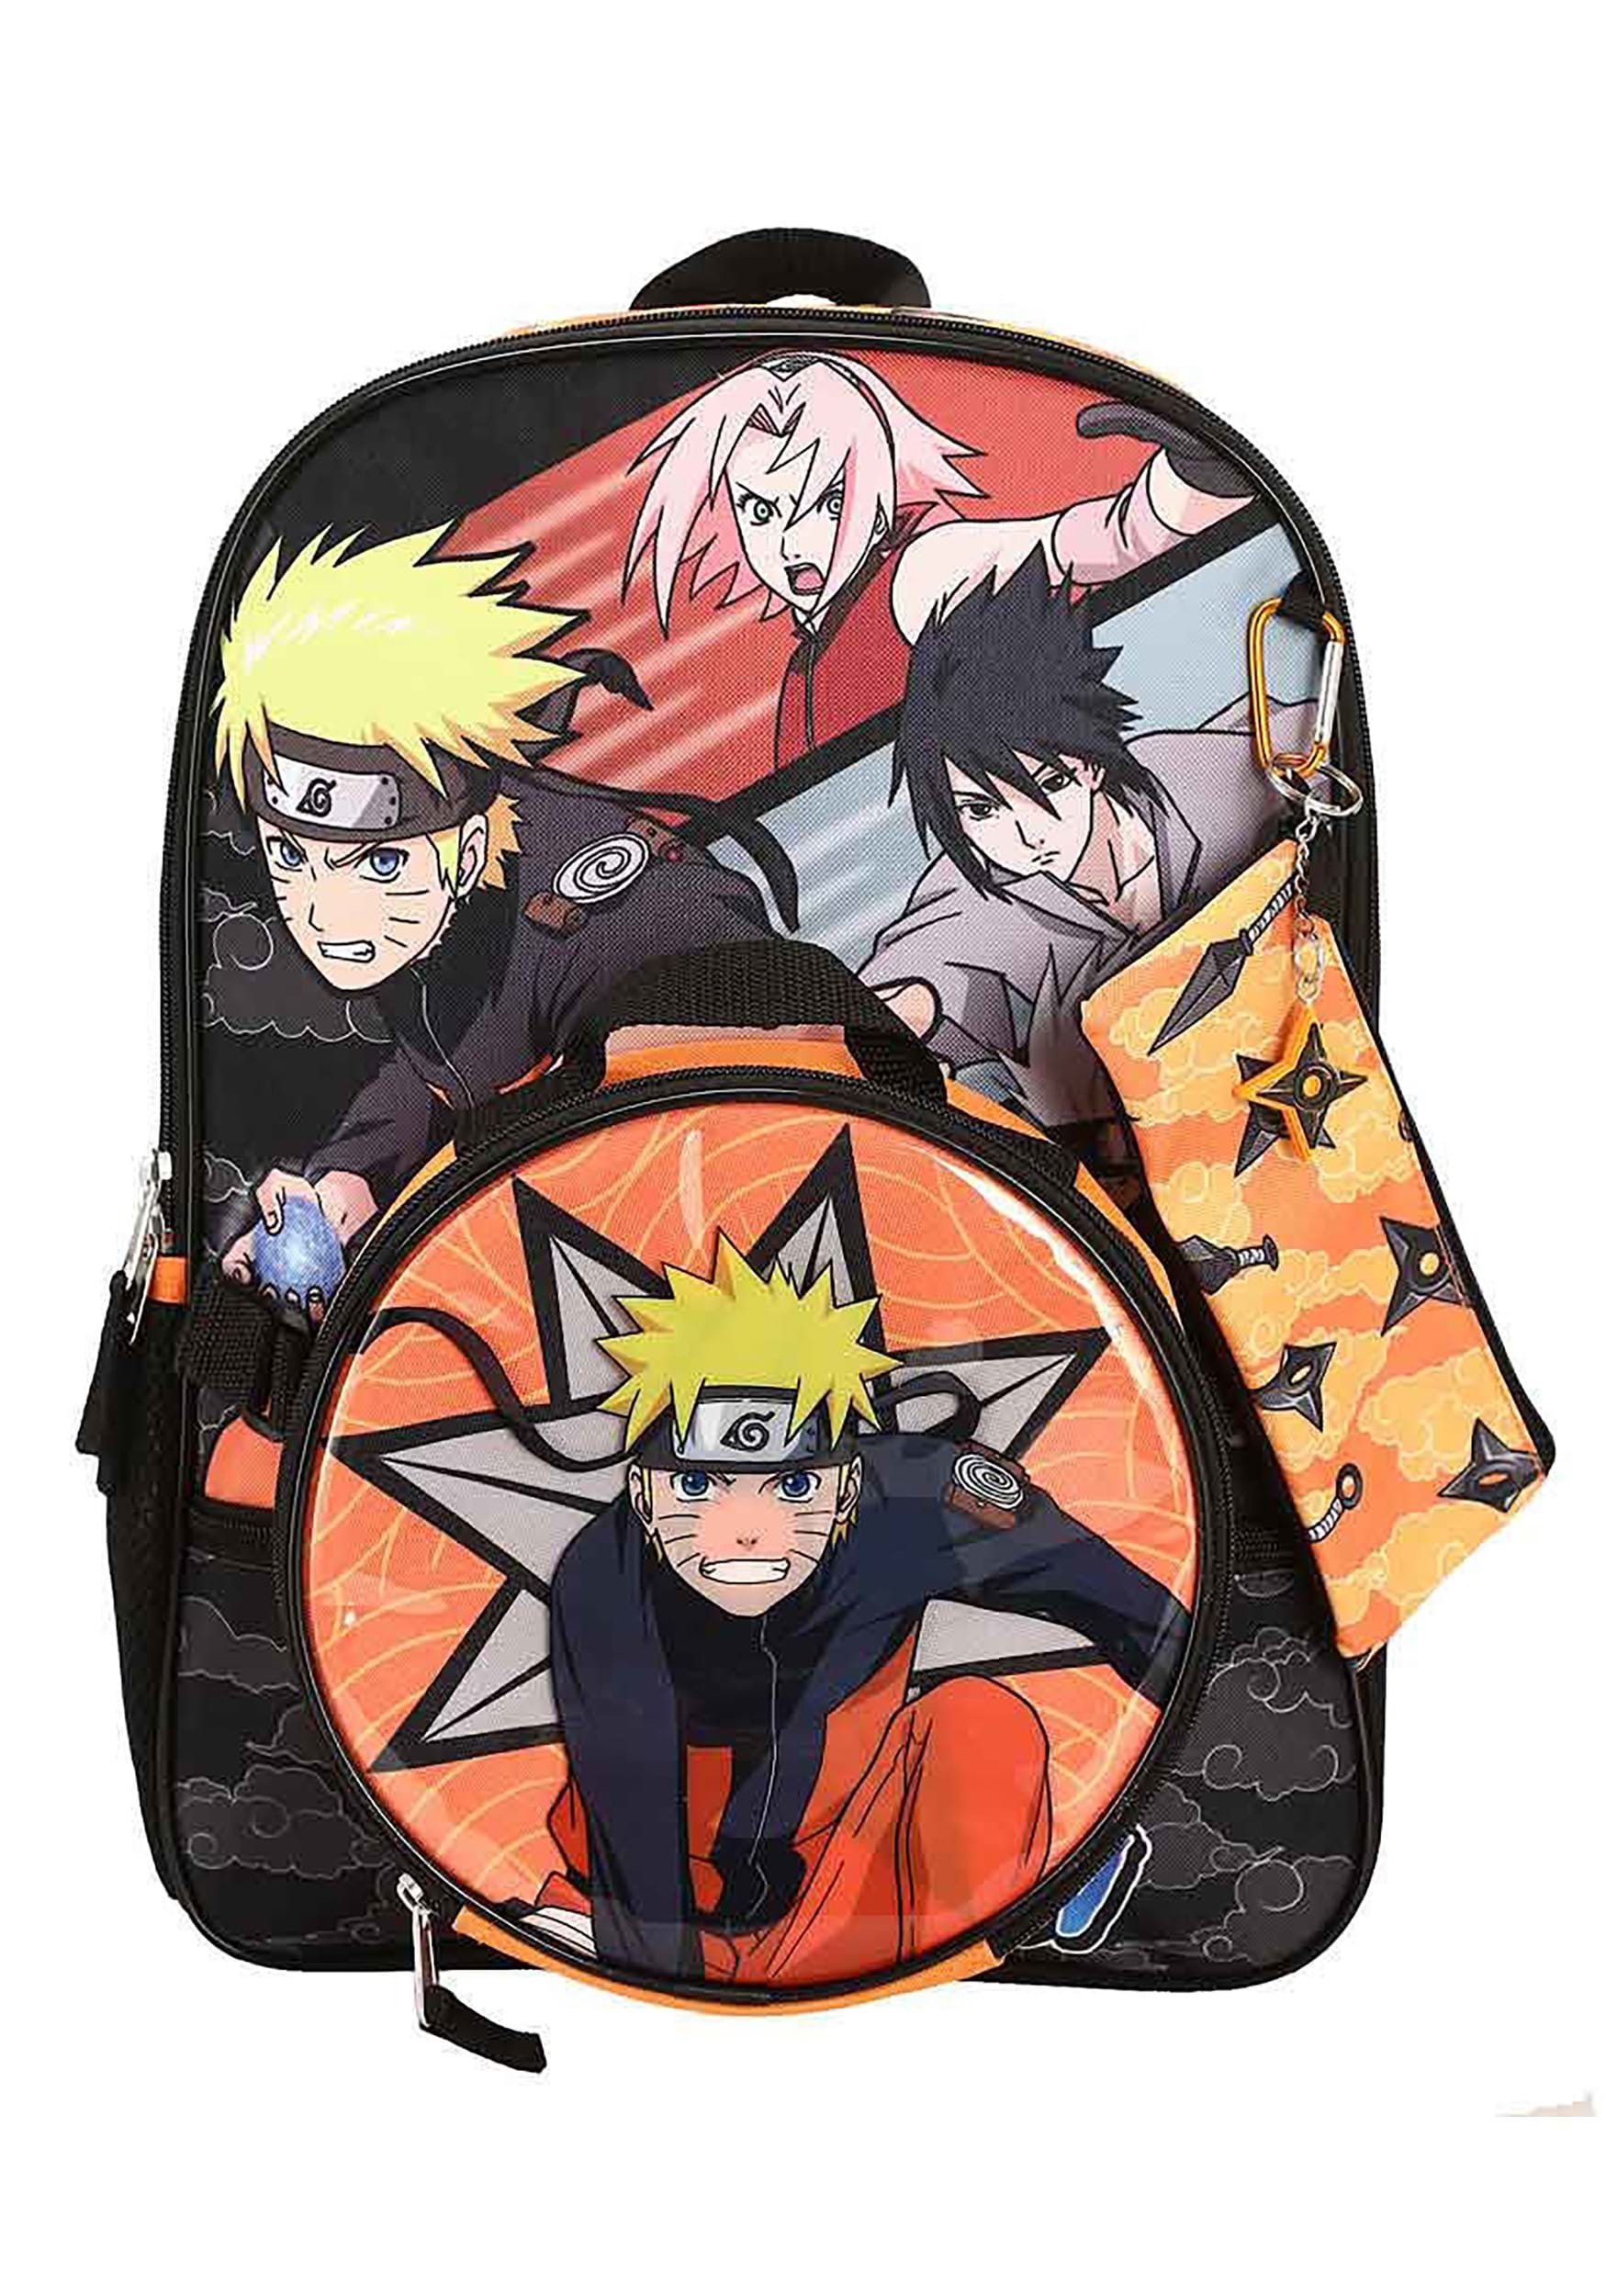 https://images.fun.com/products/86676/1-1/naruto-characters-5-piece-backpack-set.jpg